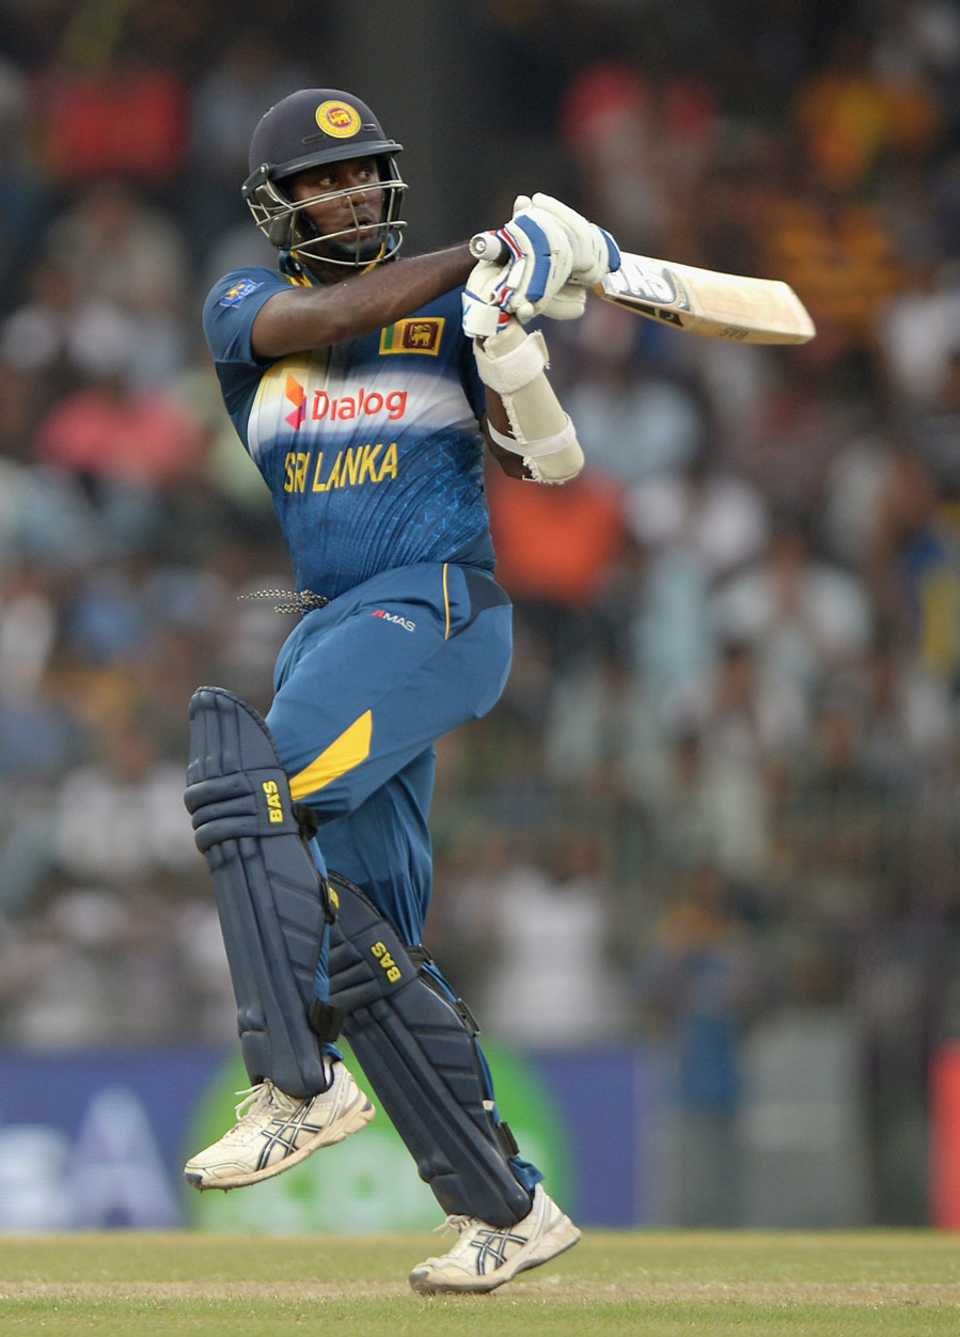 Angelo Mathews completed victory with an unbeaten 51